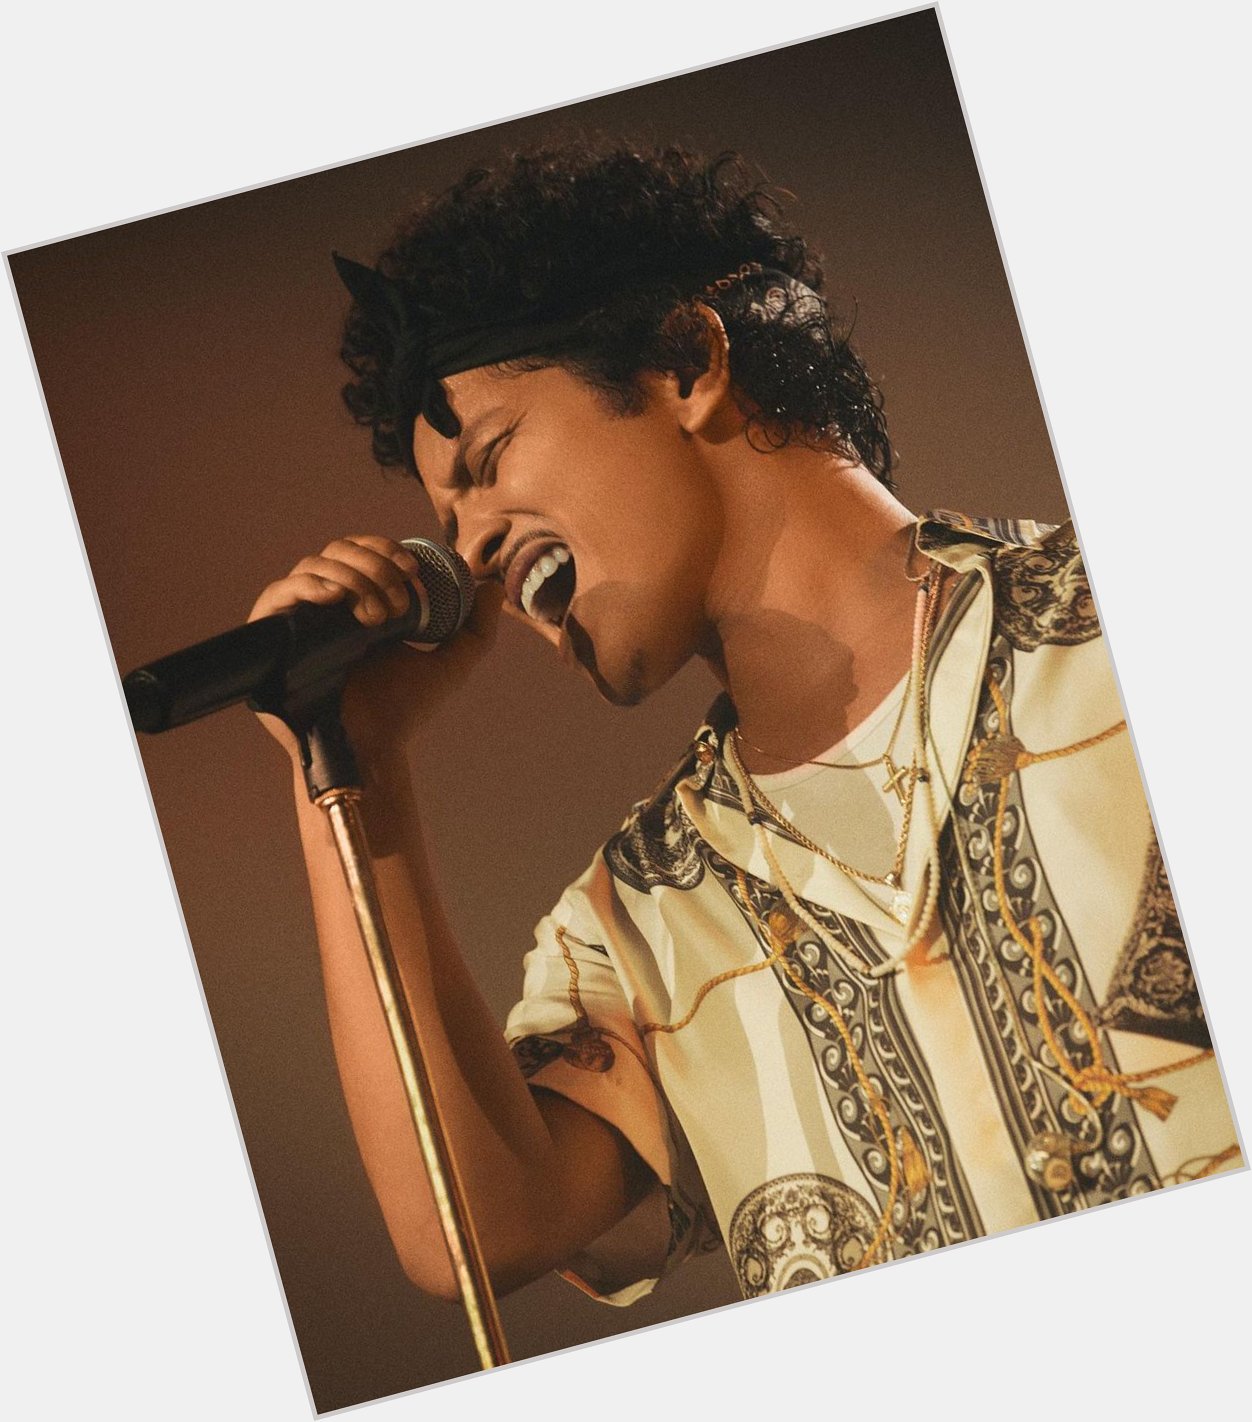 Happy Birthday,  What are your top 5 songs by Bruno Mars? 